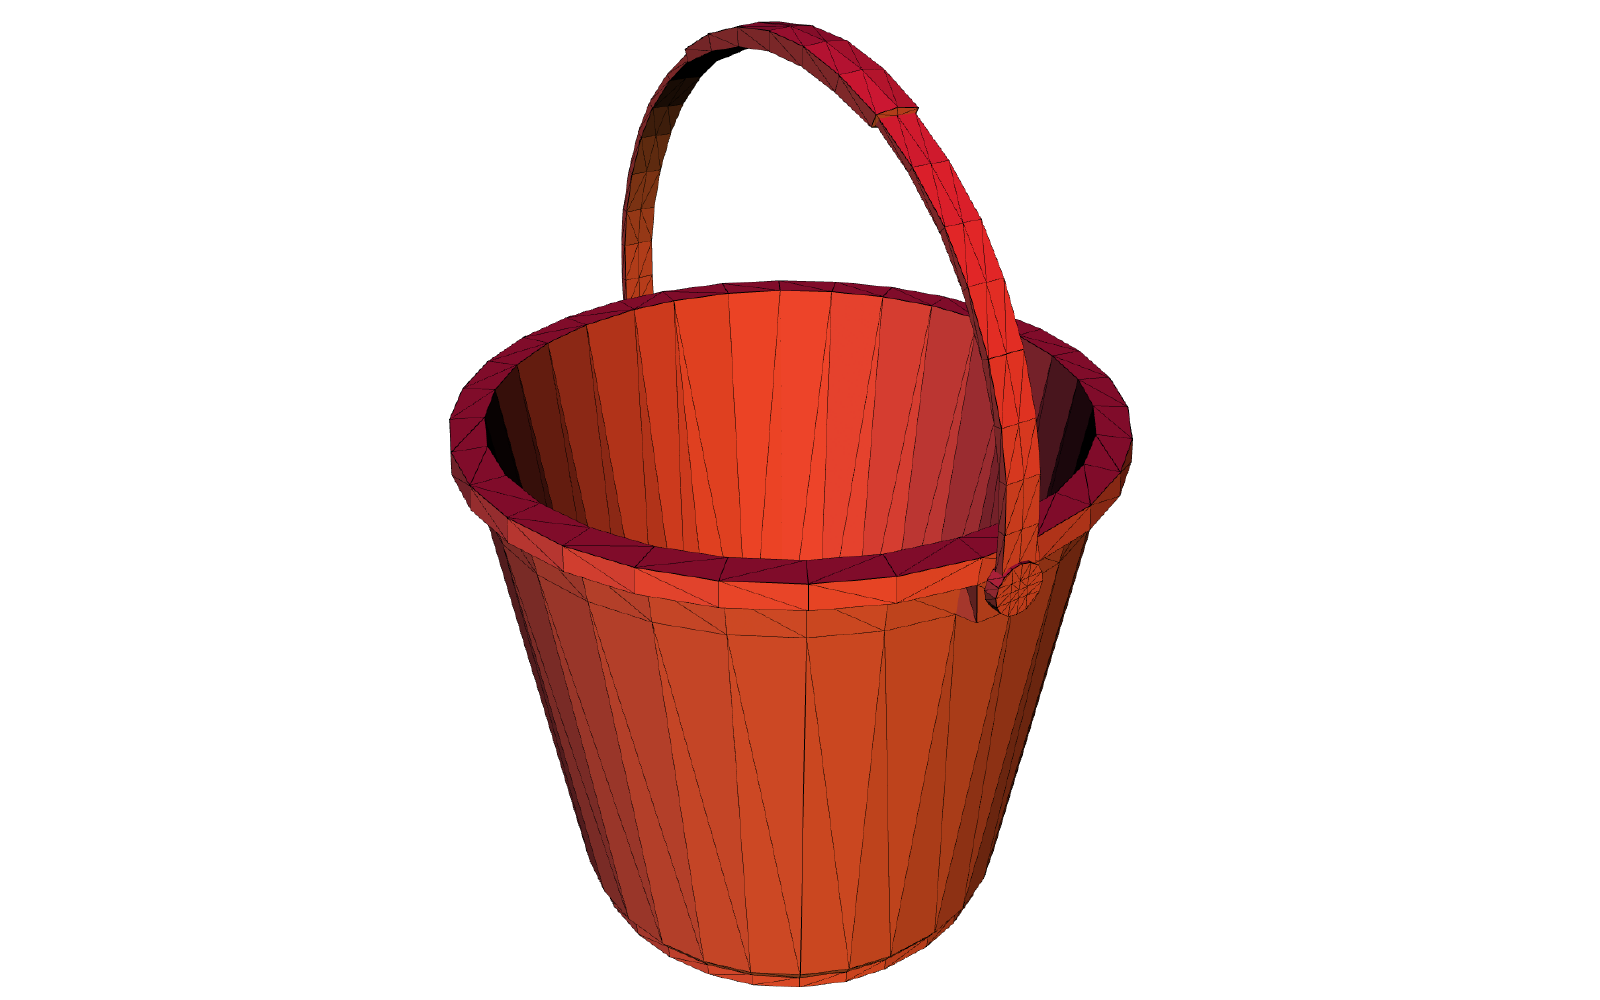 3D Model of a Bucket For Drawing Reference